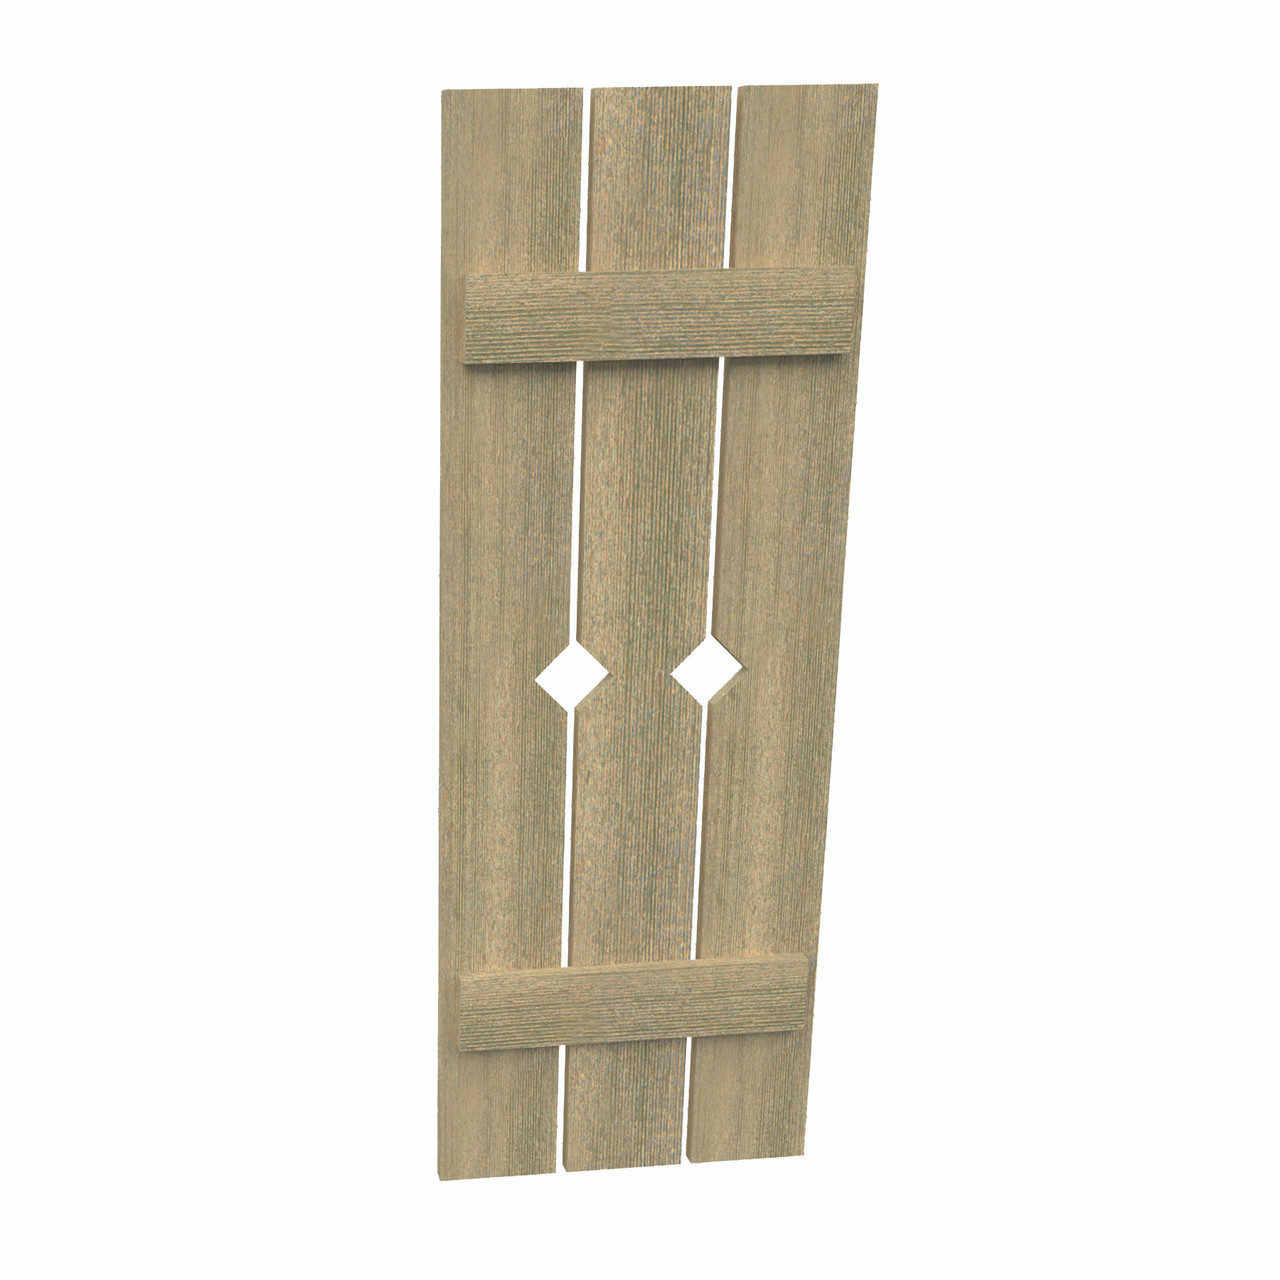 18 inch by 70 inch Plank Shutter with 3-Plank, Diamond